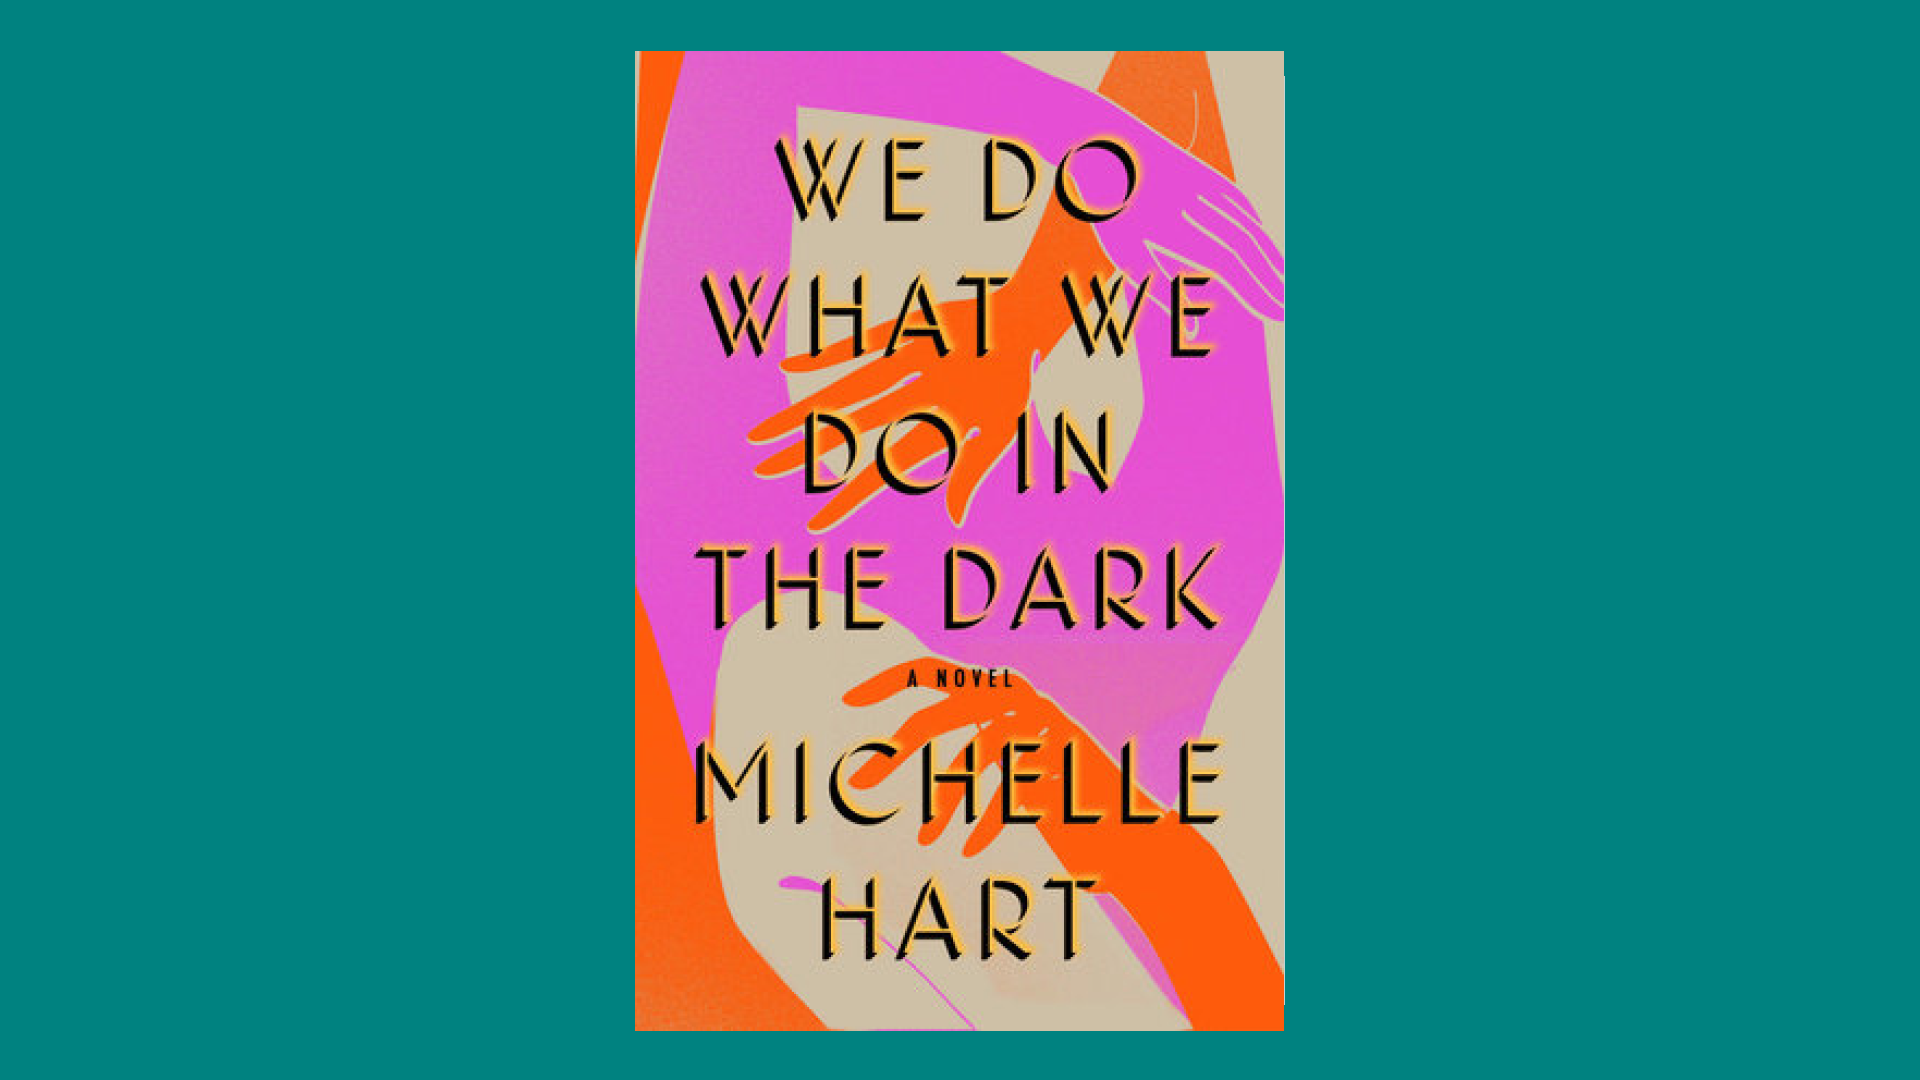 “What We Do in the Dark” by Michelle Hart